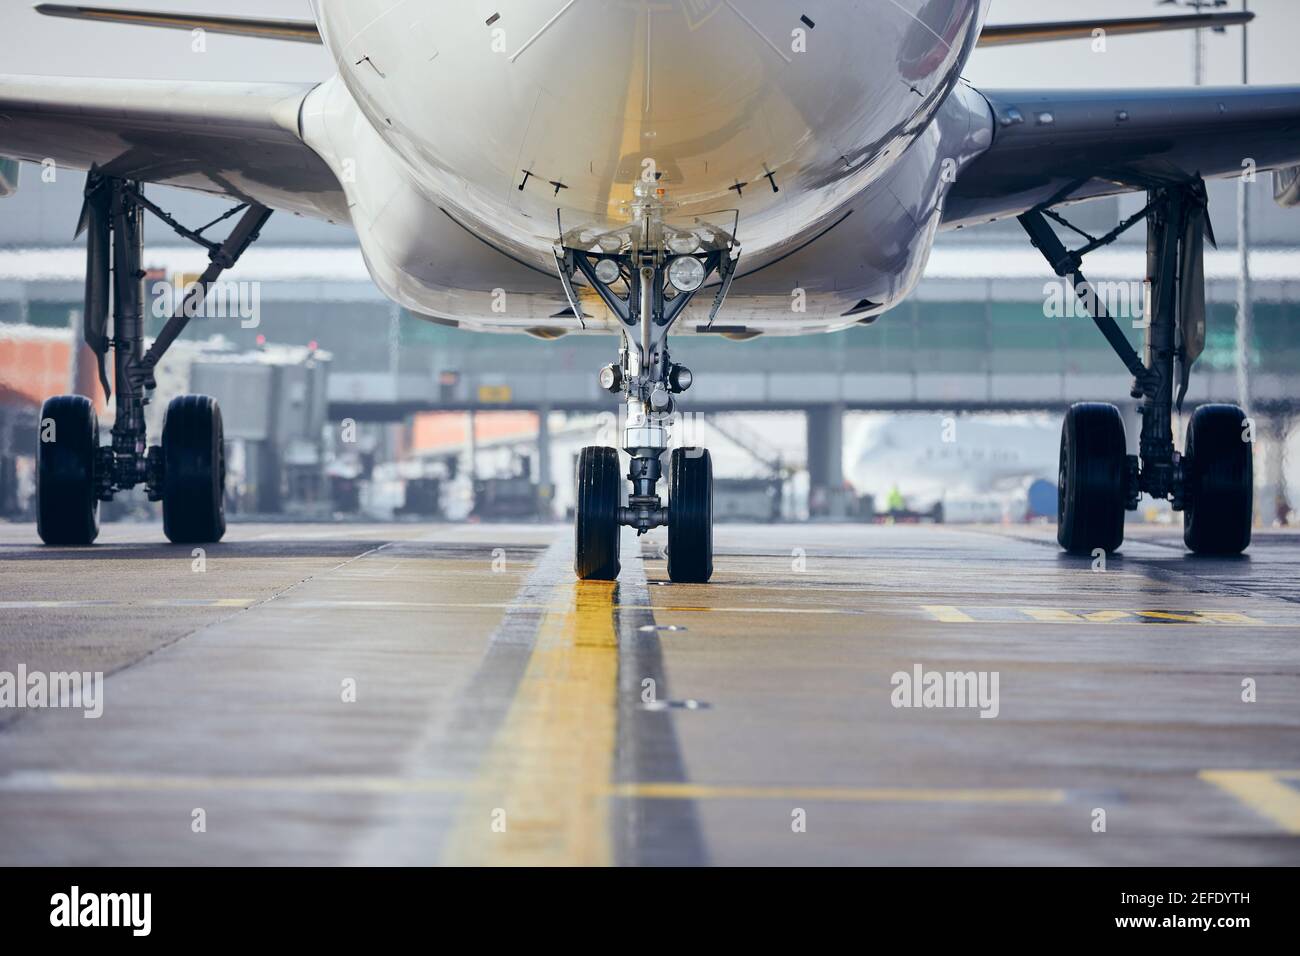 Front view of plane at airport. Commercial airplane taxiing to runway before take off. Stock Photo